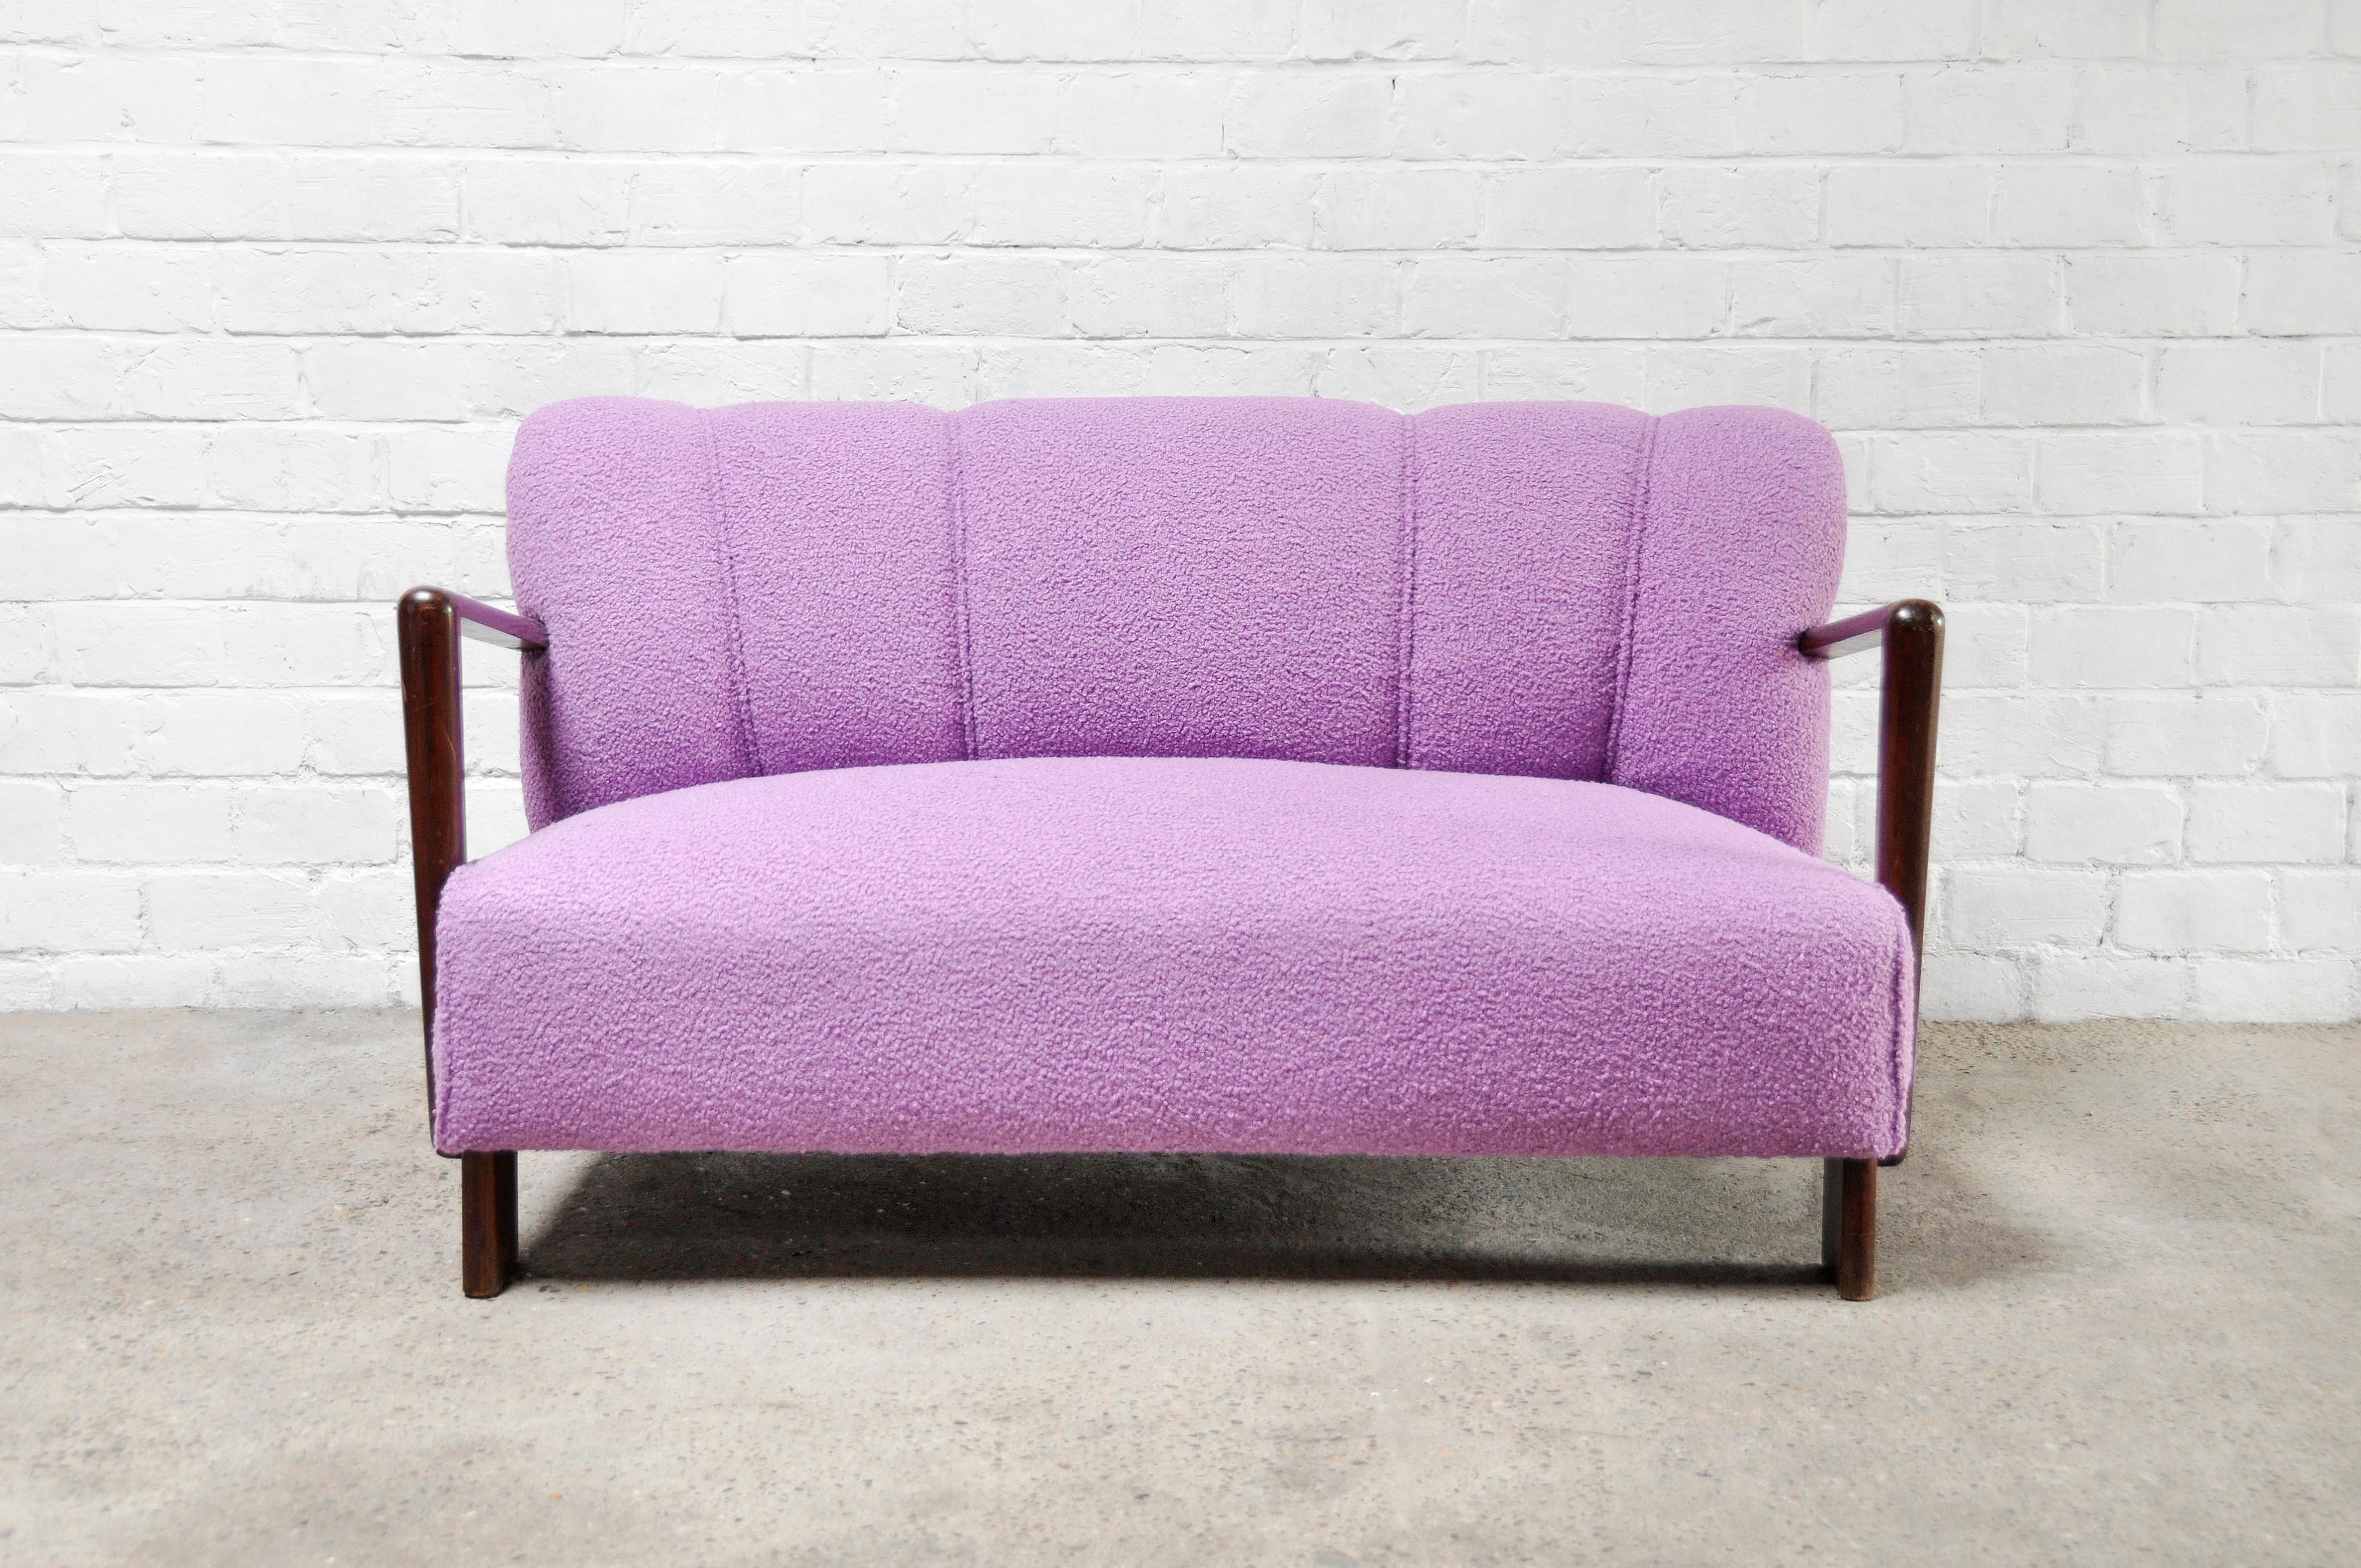 Beautiful Italian two seater sofa in purple bouclé wool, 1950s. The fabric is newly reupholstered in a warm and soft purple bouclé fabric. The unique feature of this loveseat sofa is its angular sculptural wooden armrests. The back of this sofa